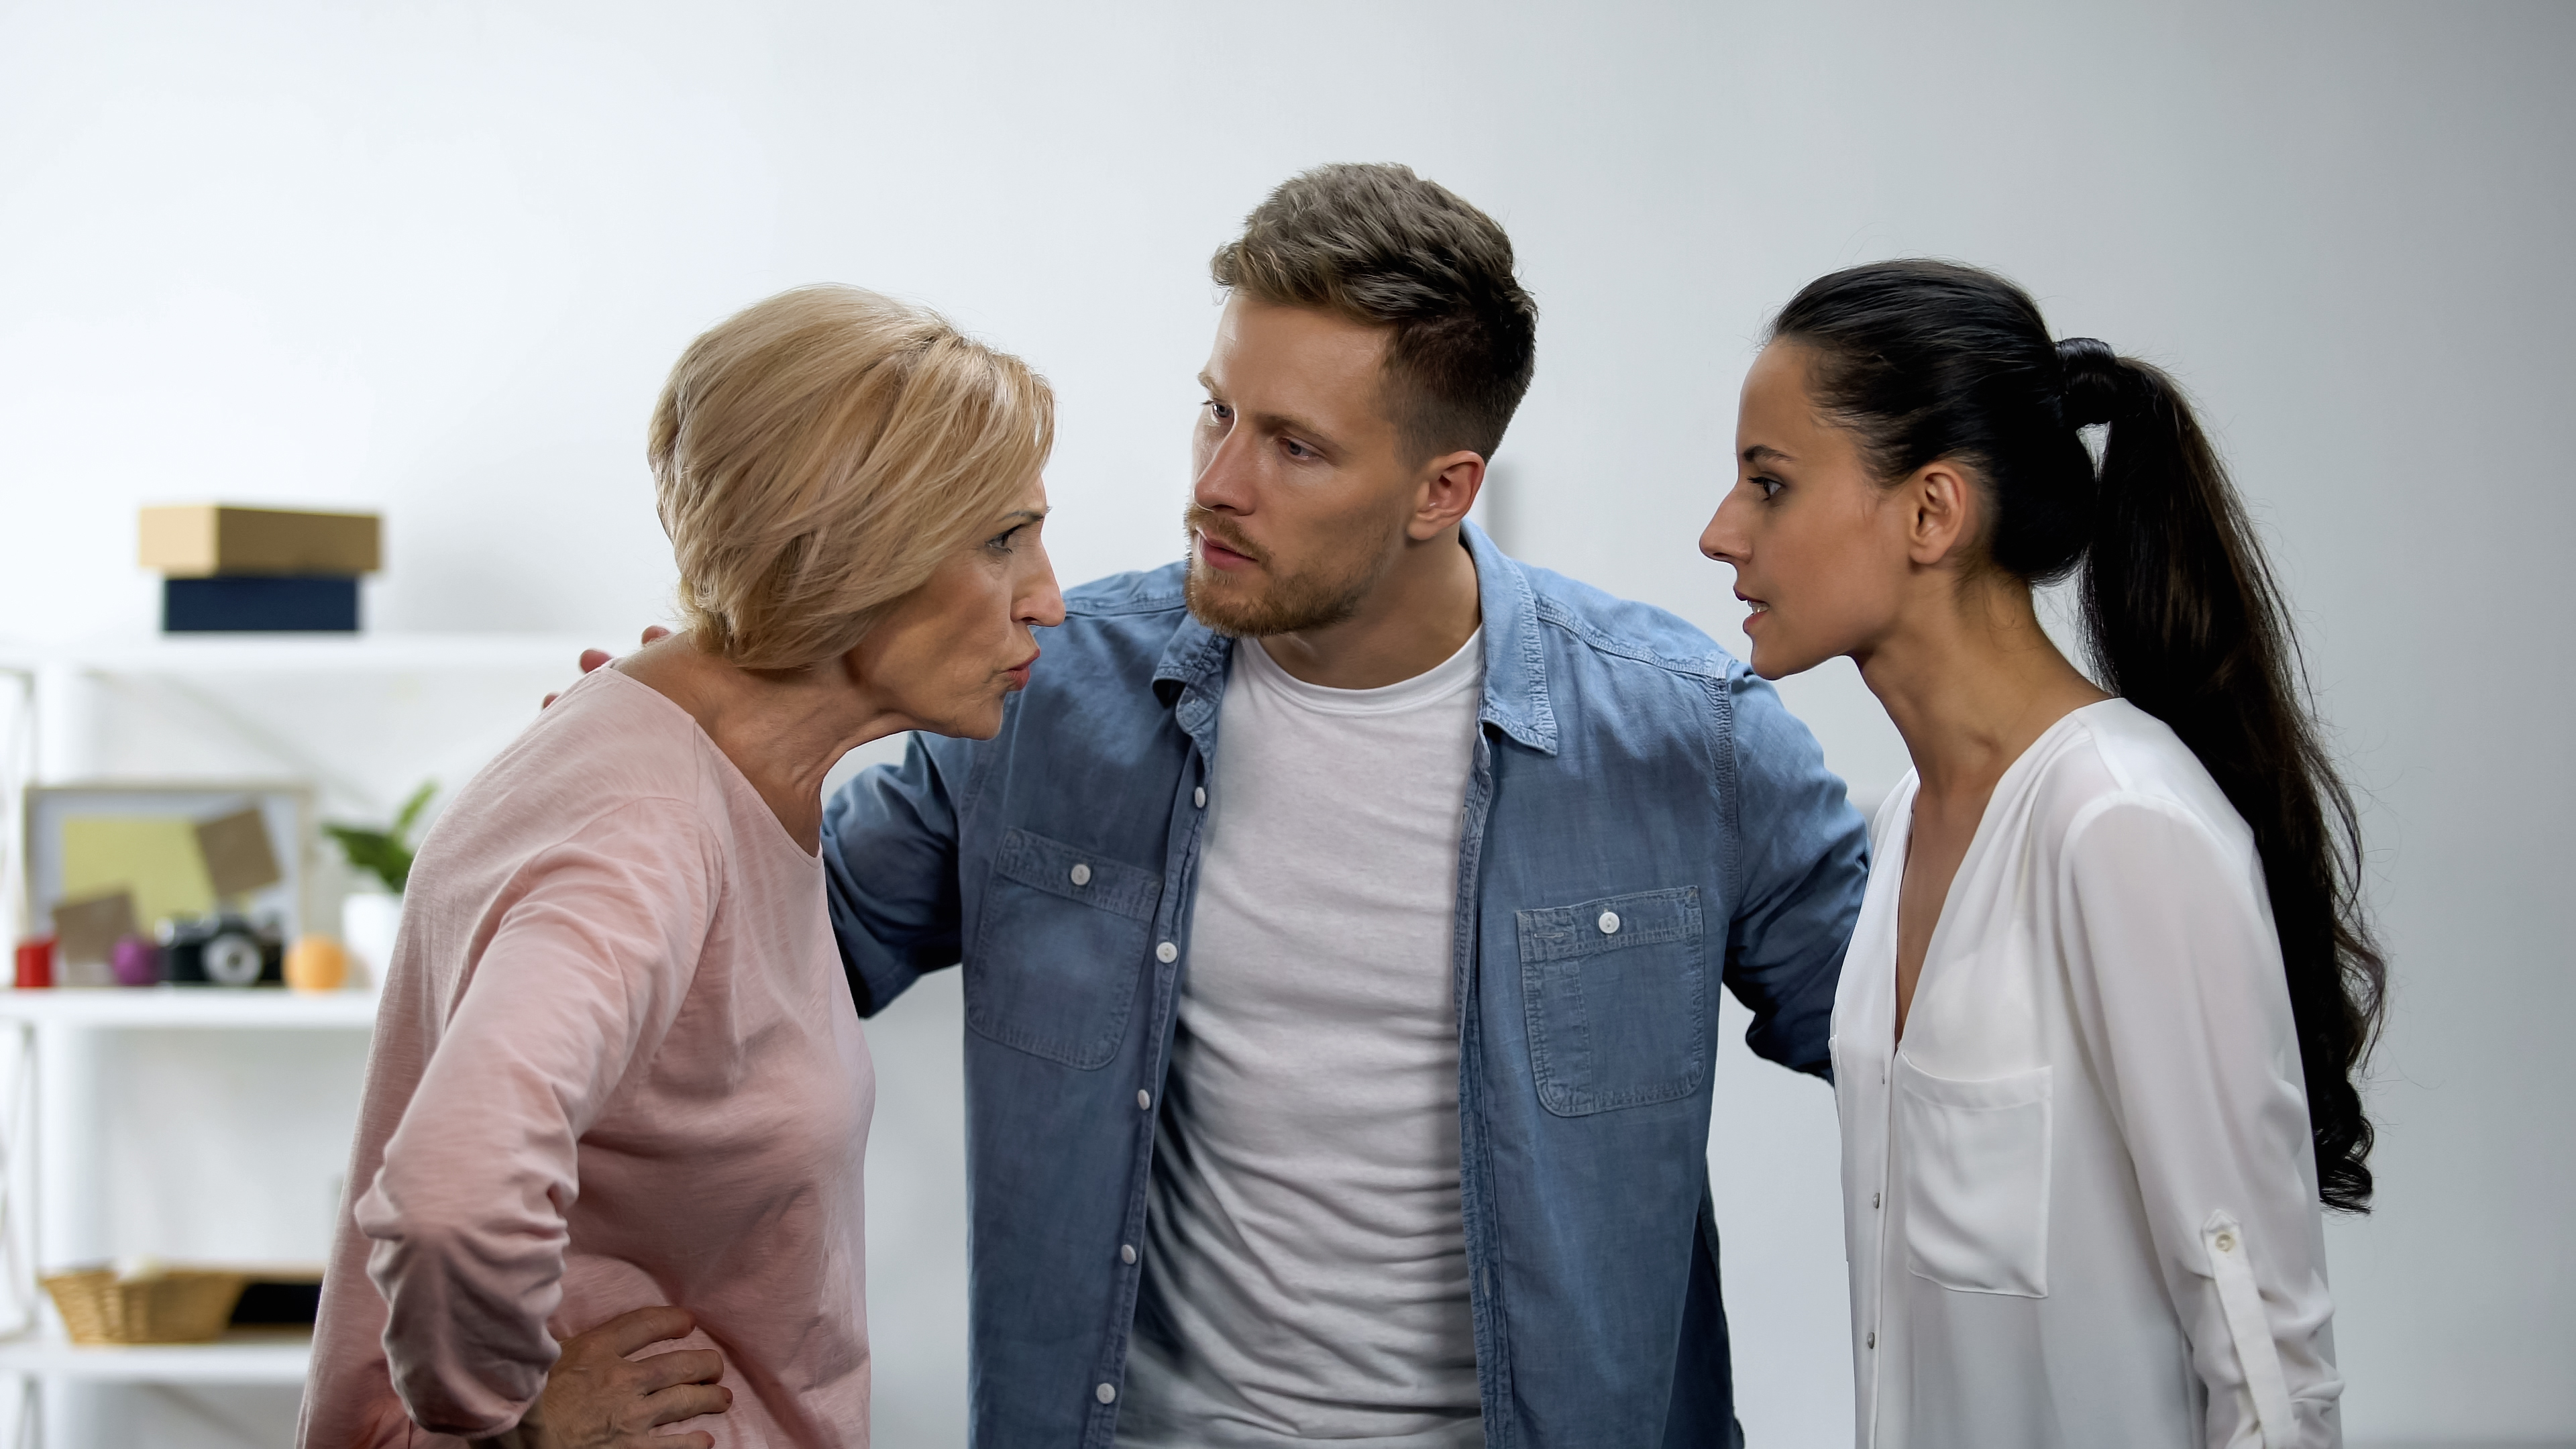 A man standing between an older woman and a younger one having an argument | Source: Shutterstock